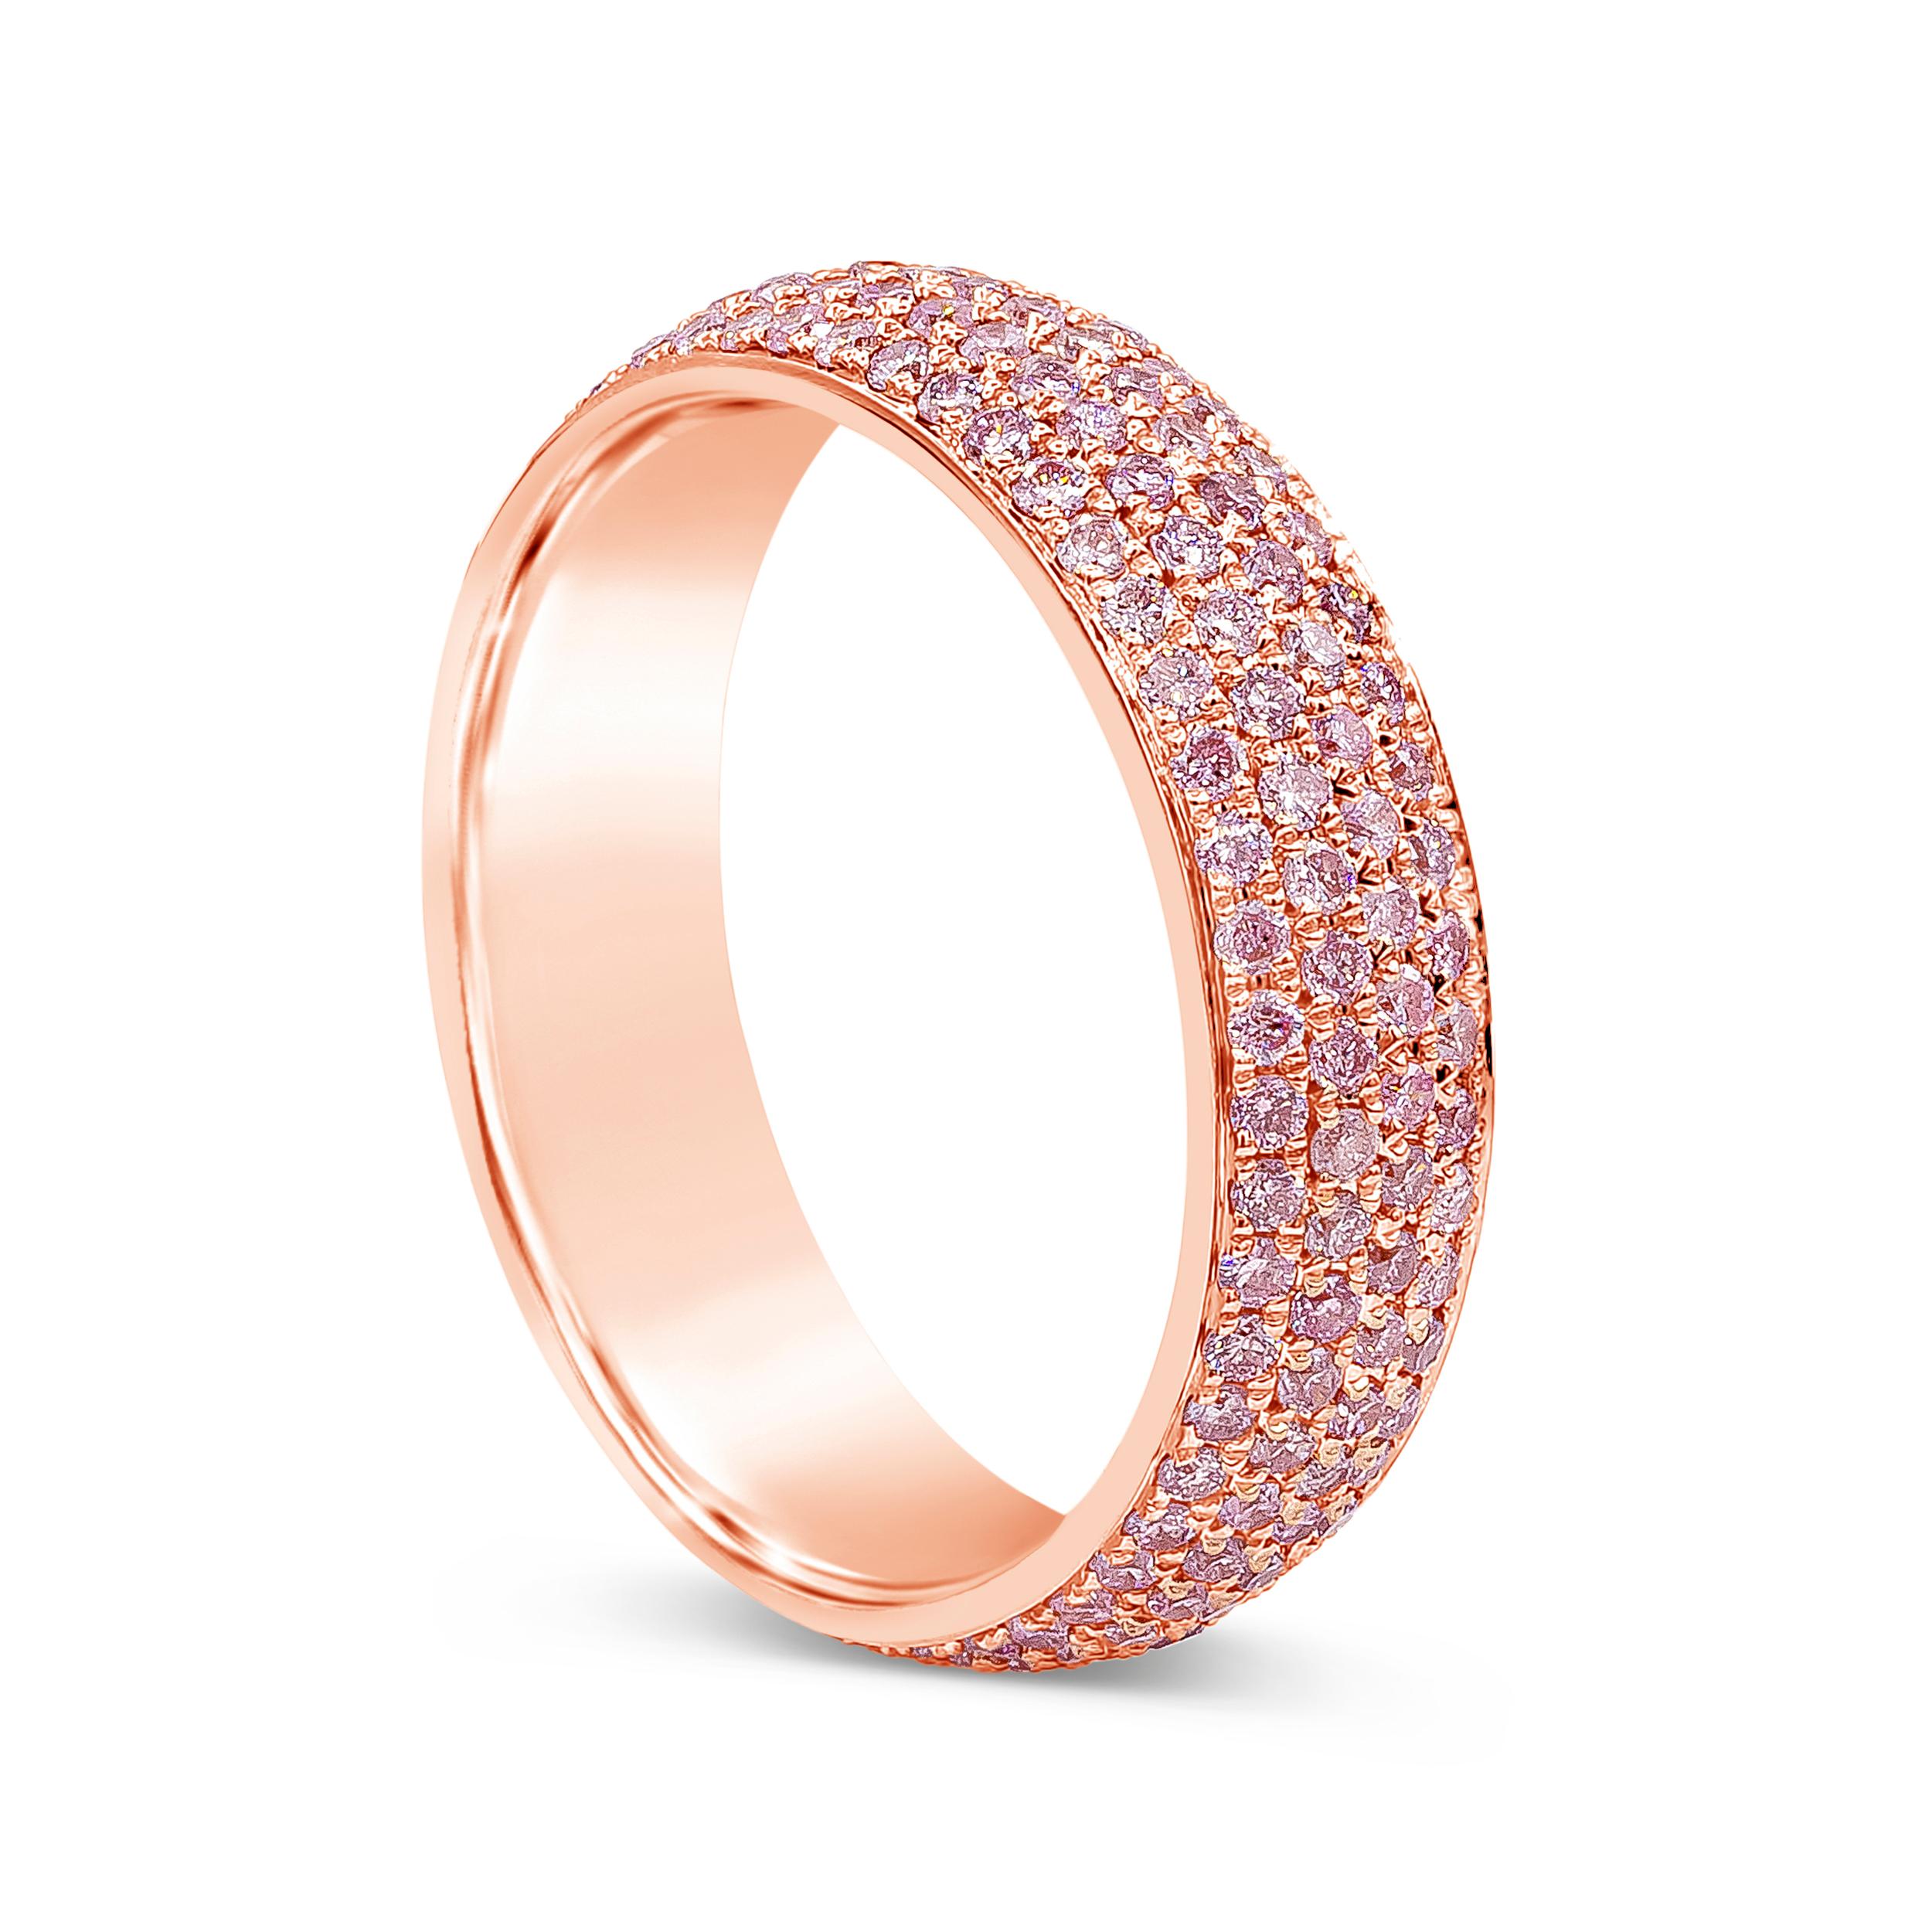 A chic and color-rich wedding band showcasing four rows of 200 round brilliant pink diamonds, micro-pave set in 18k rose gold. Diamonds weigh 1.21 carats total. The band is 5mm in width and Finely made in 18k rose gold. Size 6.25 US resizable upon